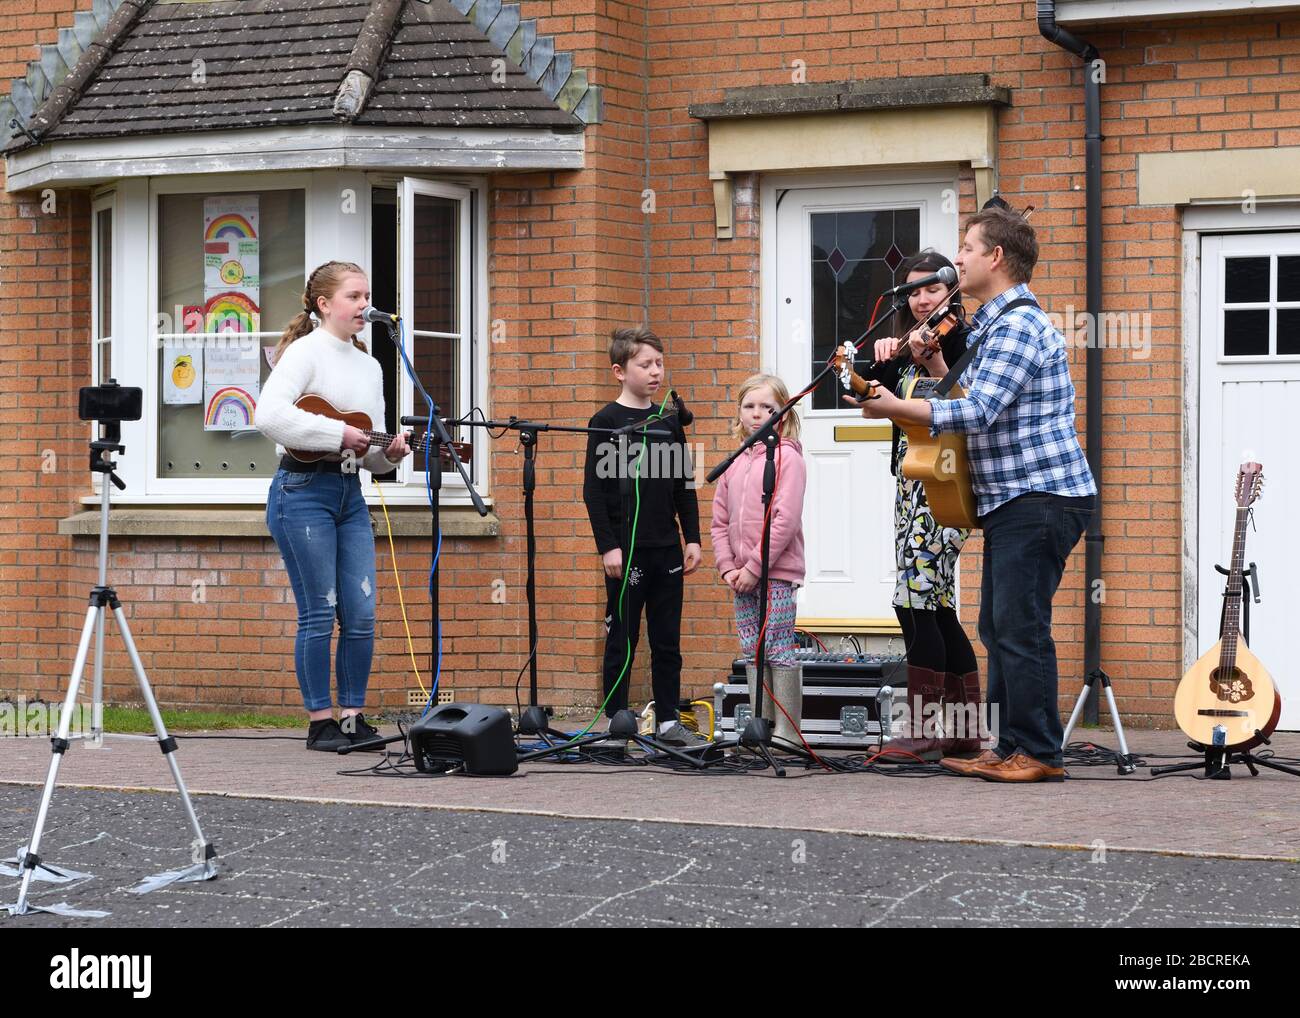 Glasgow, Scotland, UK. 5th Apr, 2020. A family in the southside of Glasgow give an impromptu traditional music concert to neighbours amid the Coronavirus lock down. Credit: Douglas Carr/Alamy Live News Stock Photo